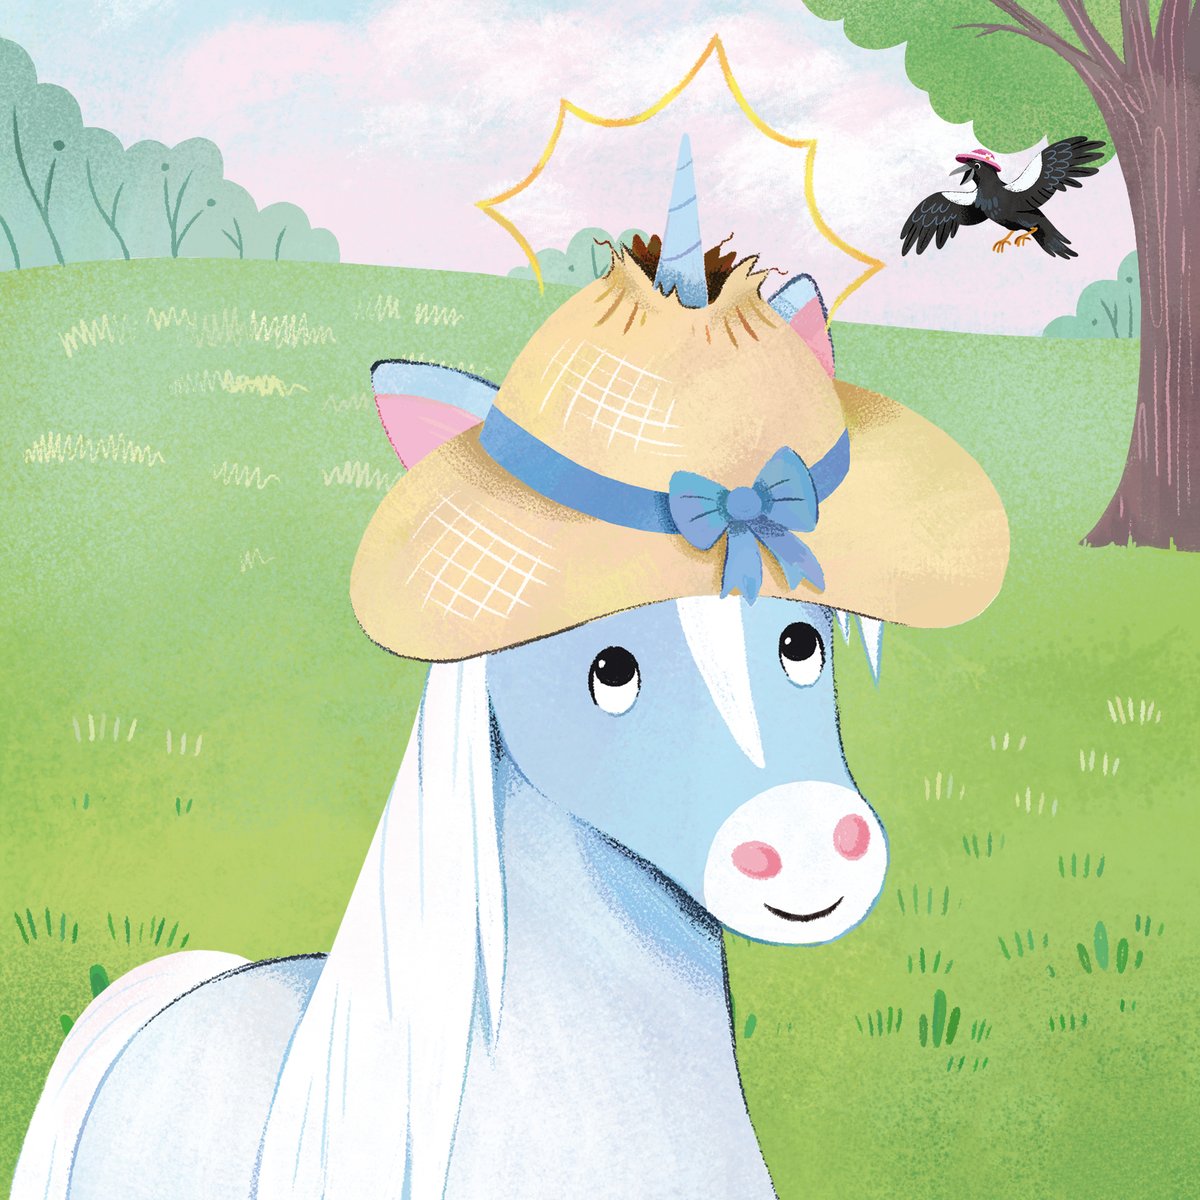 Did you know that the 9th of April is National Unicorn Day?! 🦄 What a perfect holiday! 😊 Artwork by Kristen Humphrey 🎨 #nationalunicornday #bookstagram #kidslit #illustration